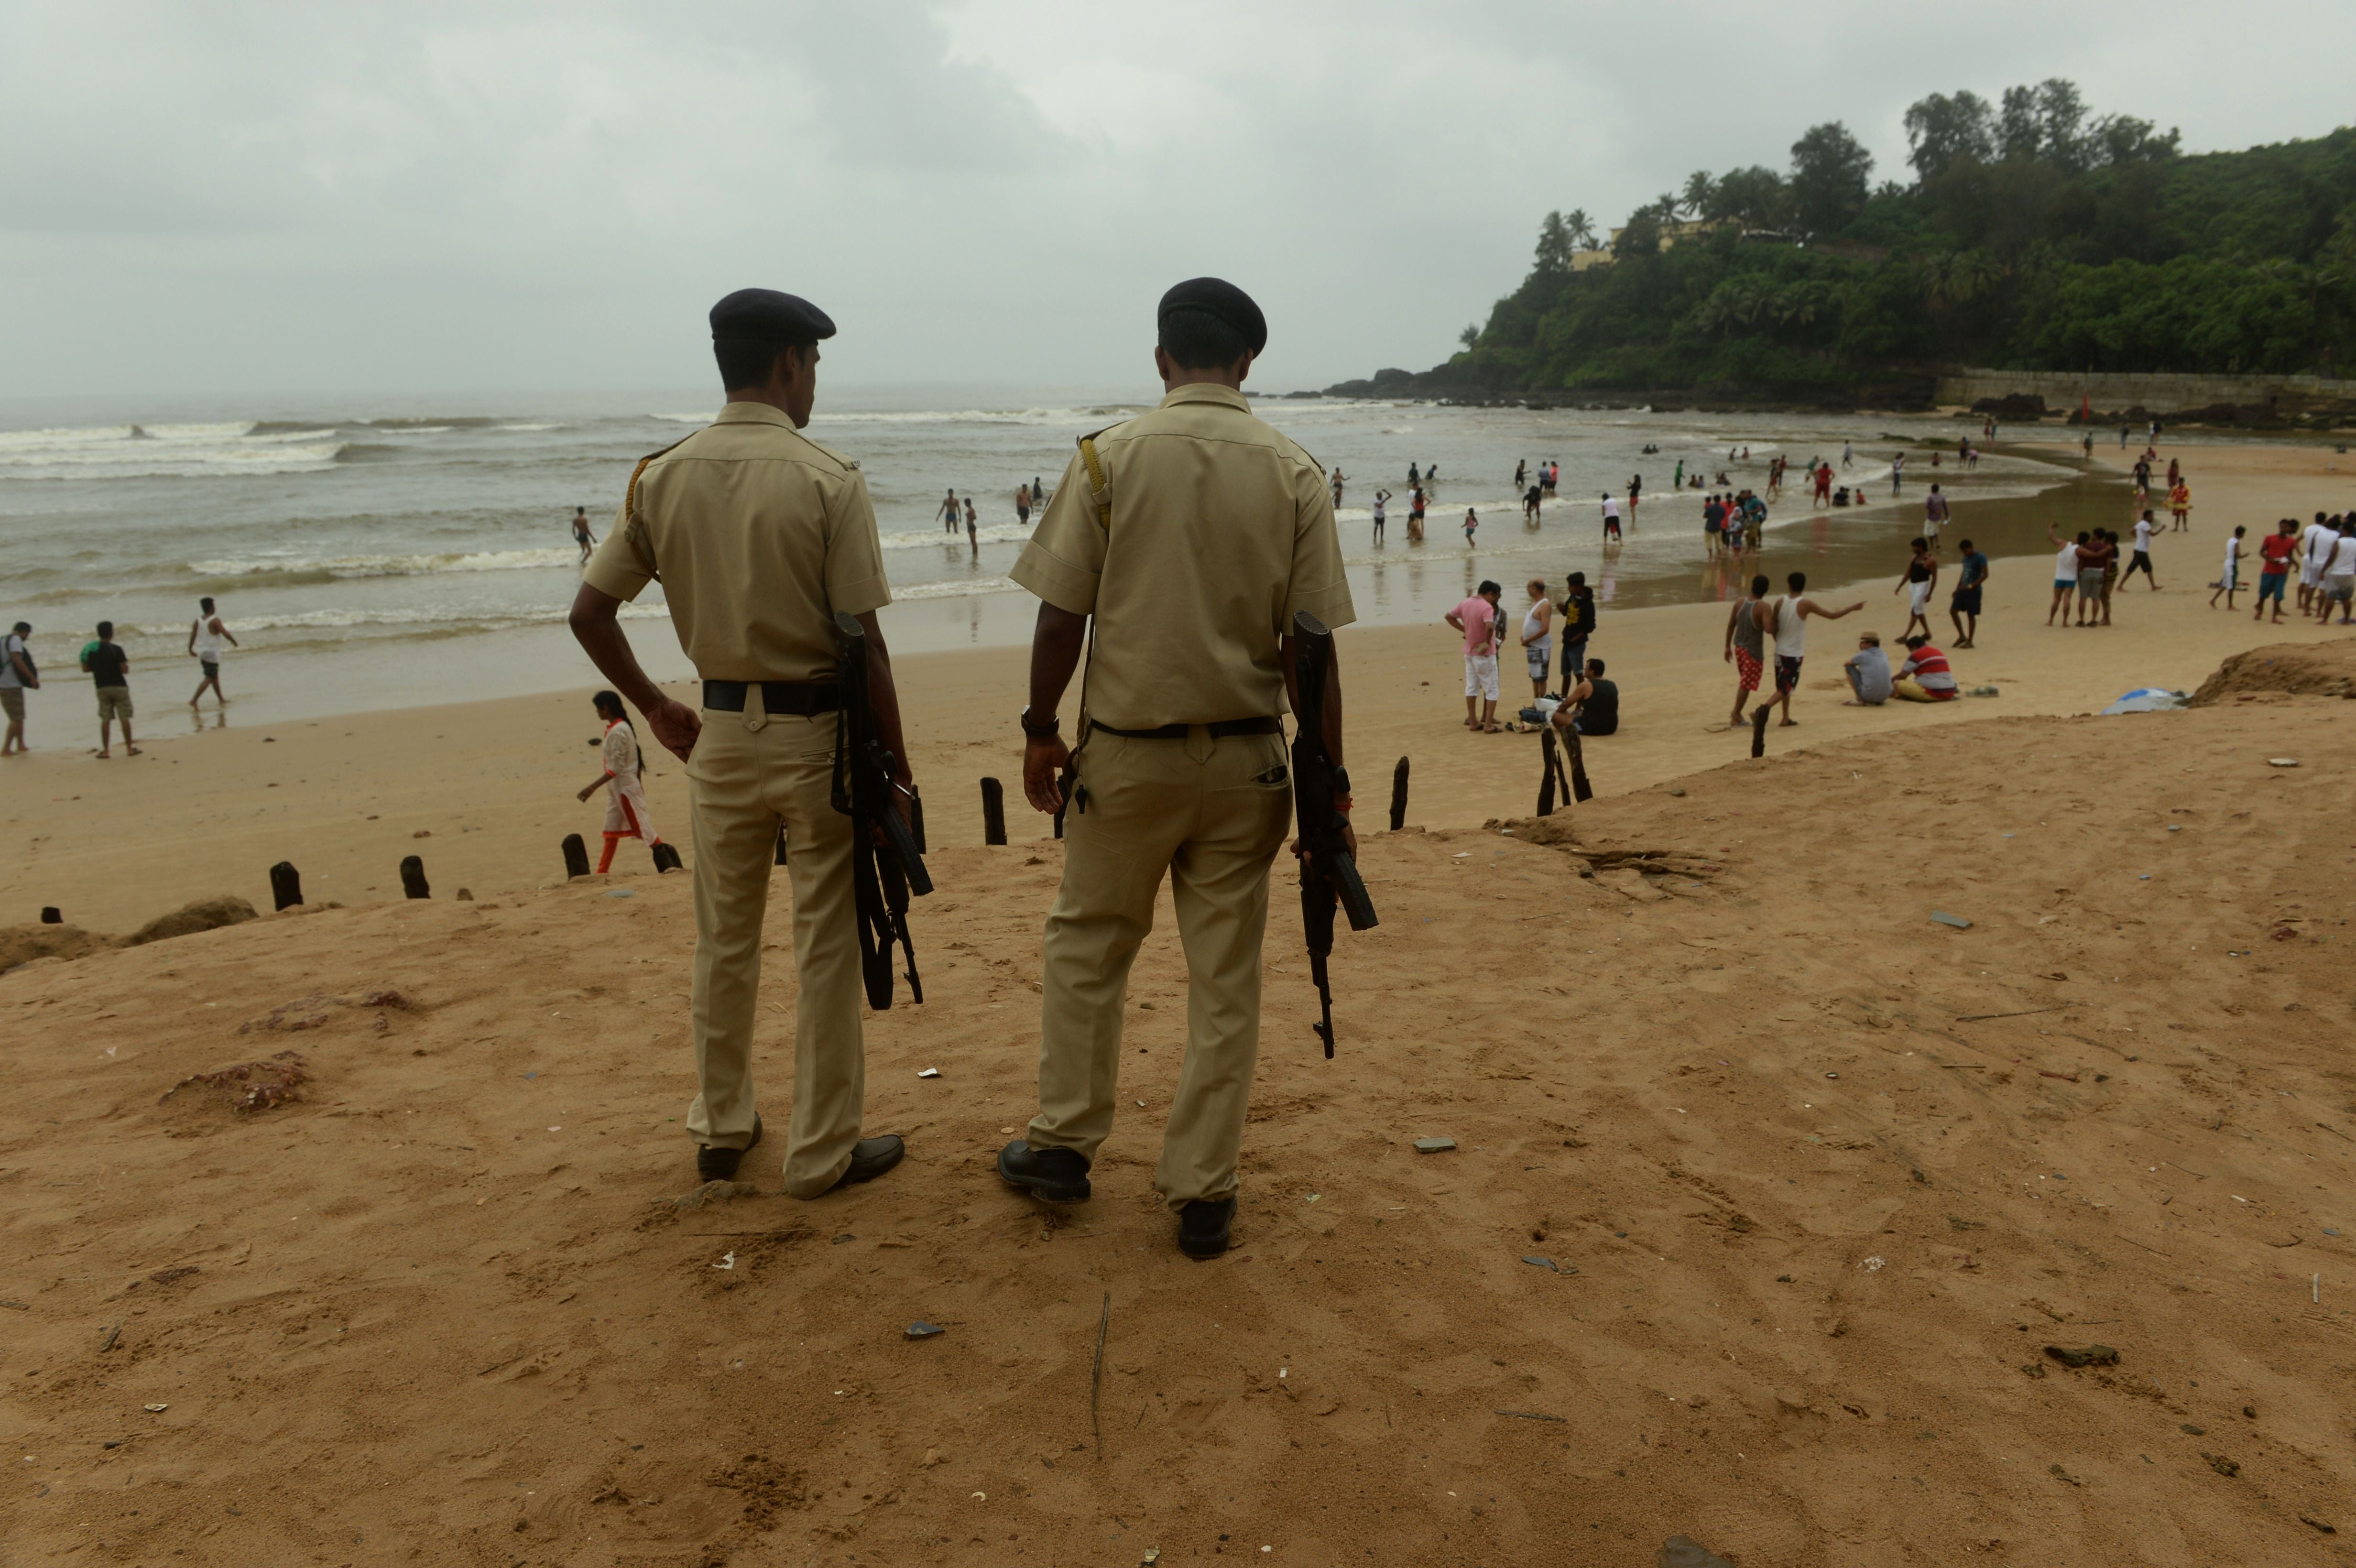 <p>A British tourist was raped on a beach in Goa, according to reports </p>